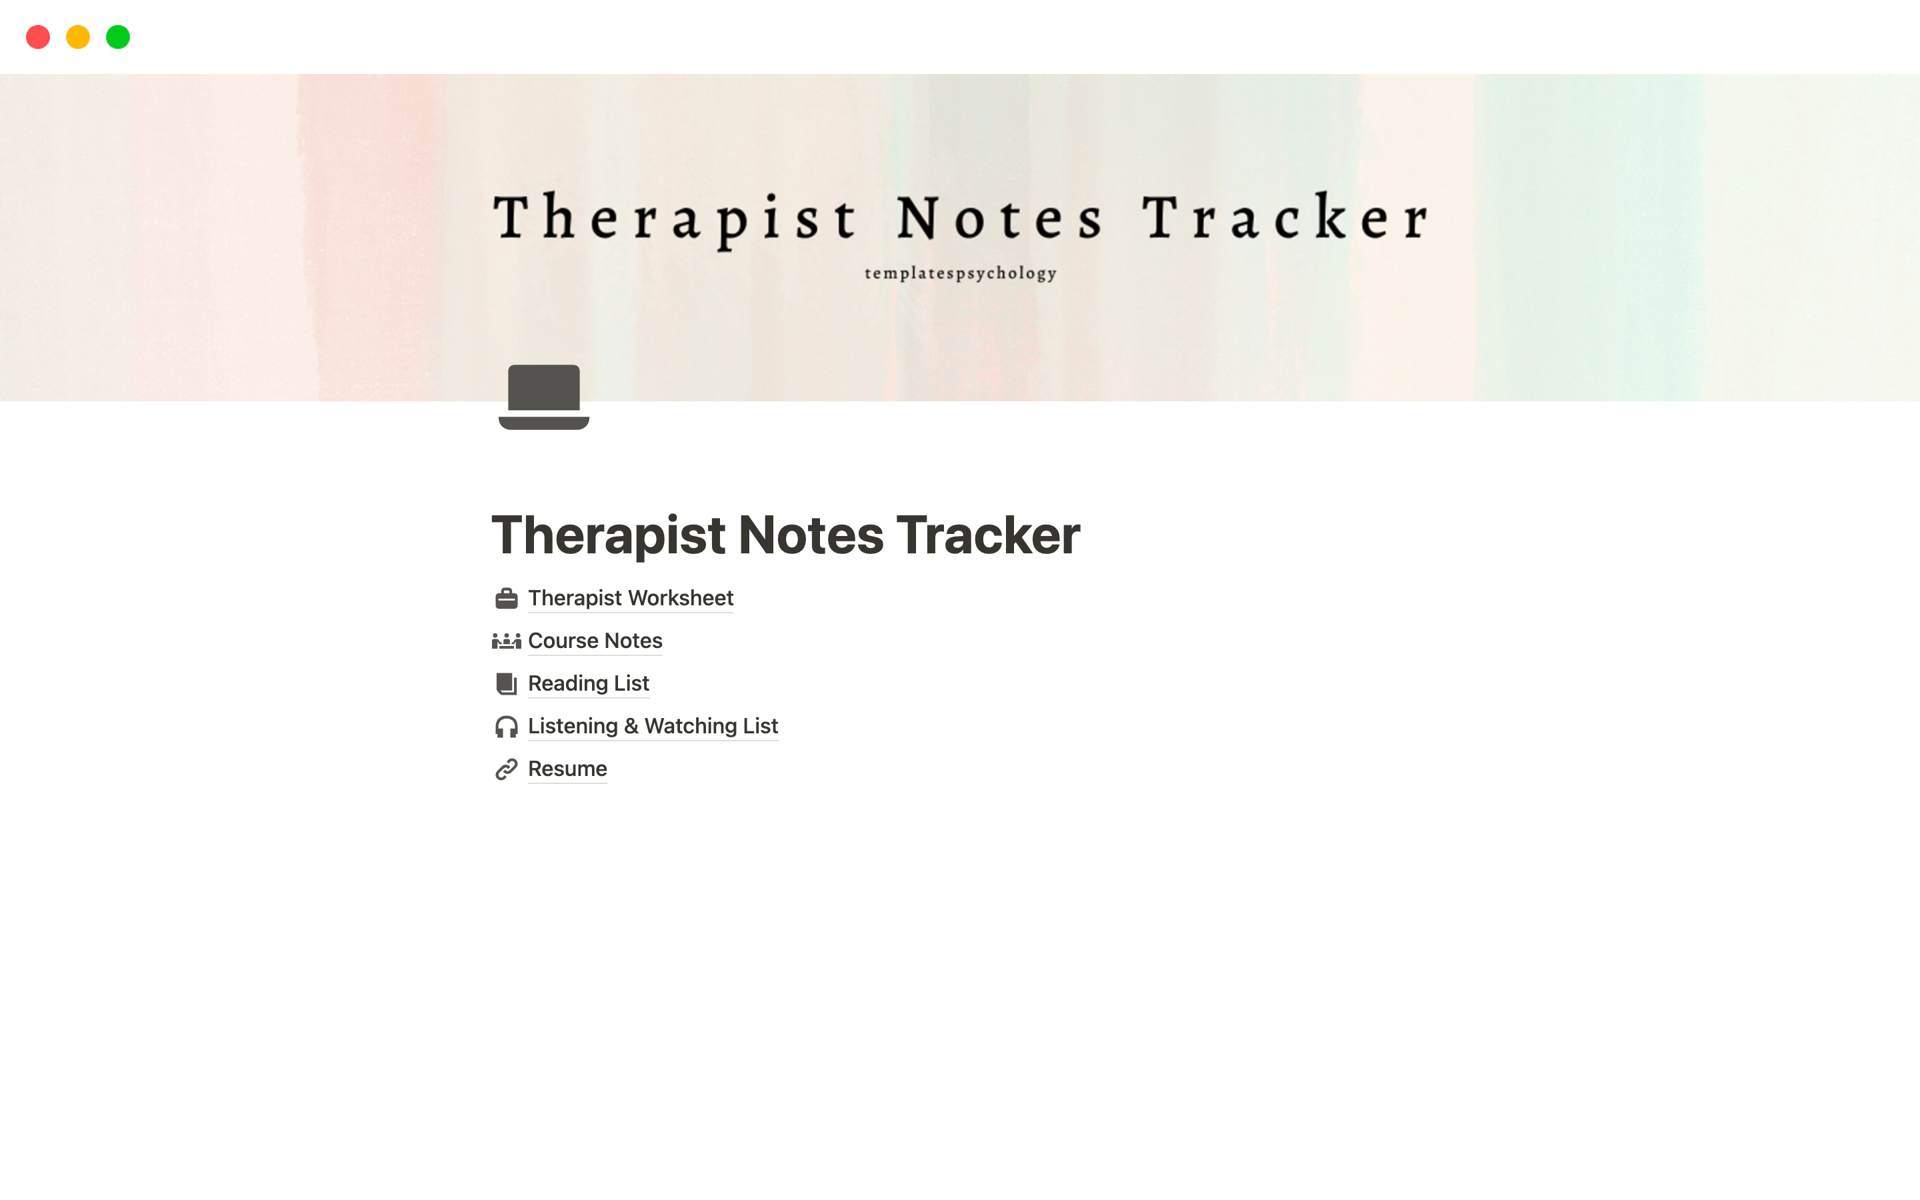 It allows therapists to collect their notes in one place.